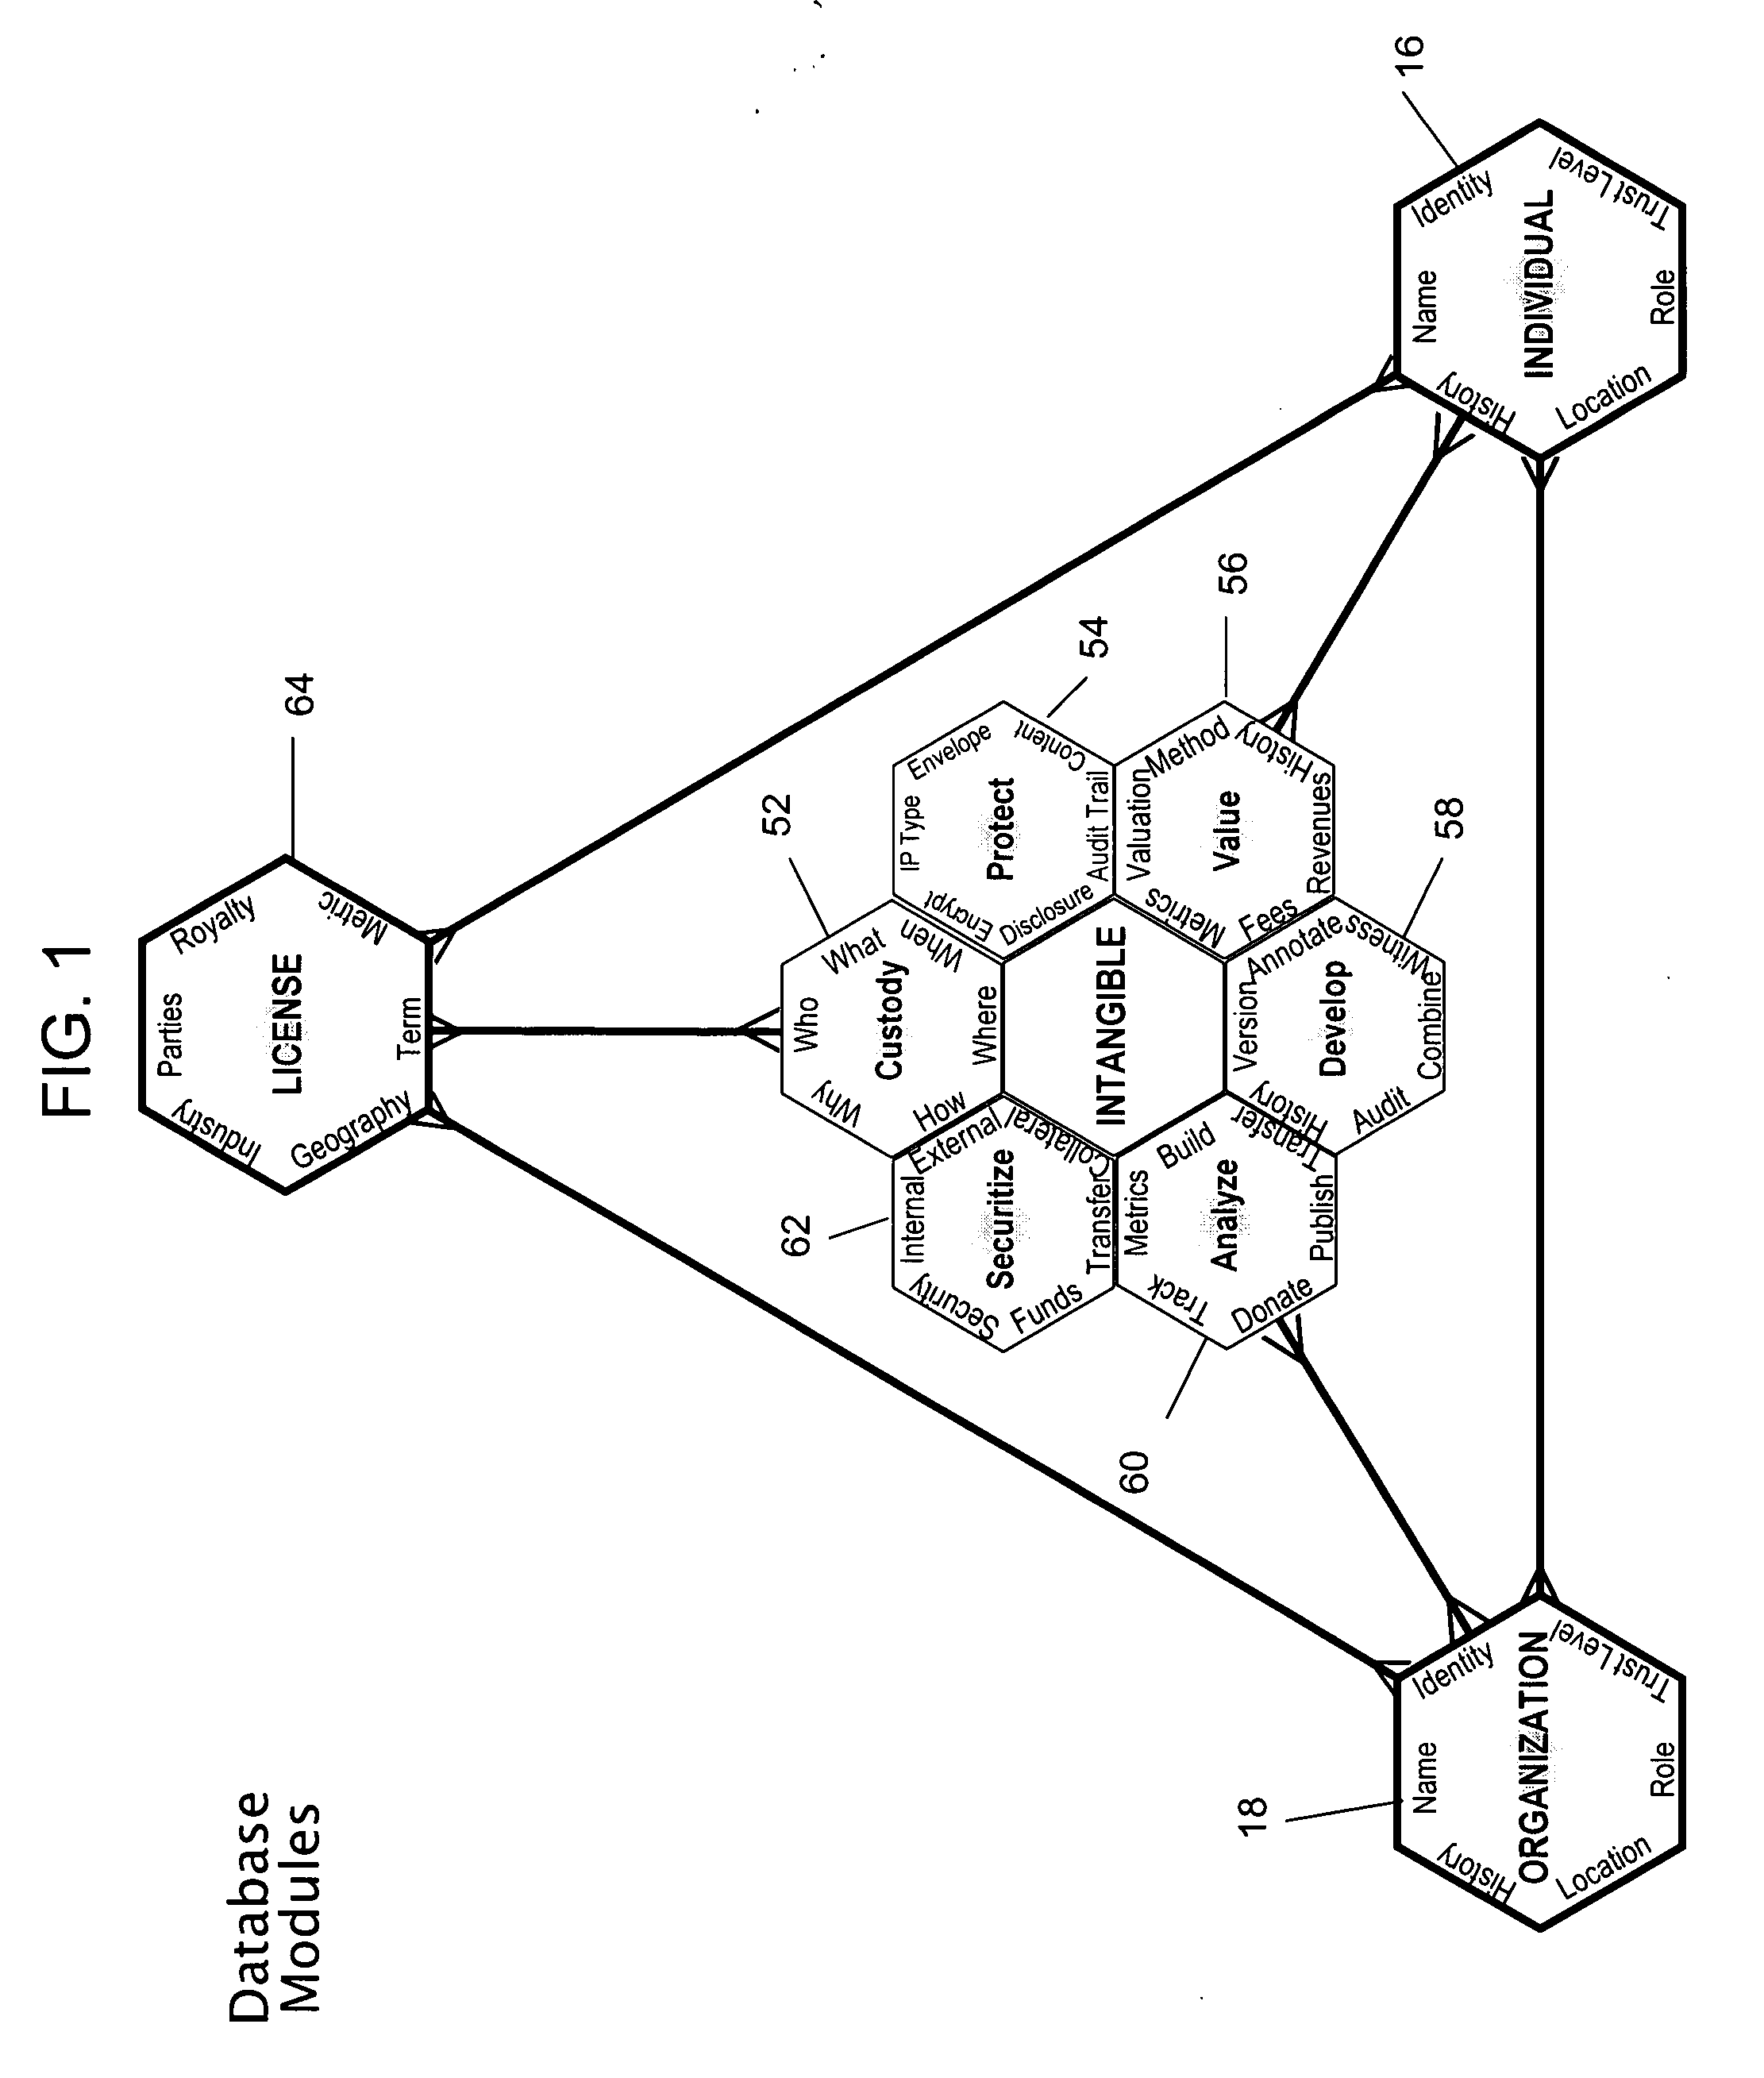 Systems and methods for management of intangible assets